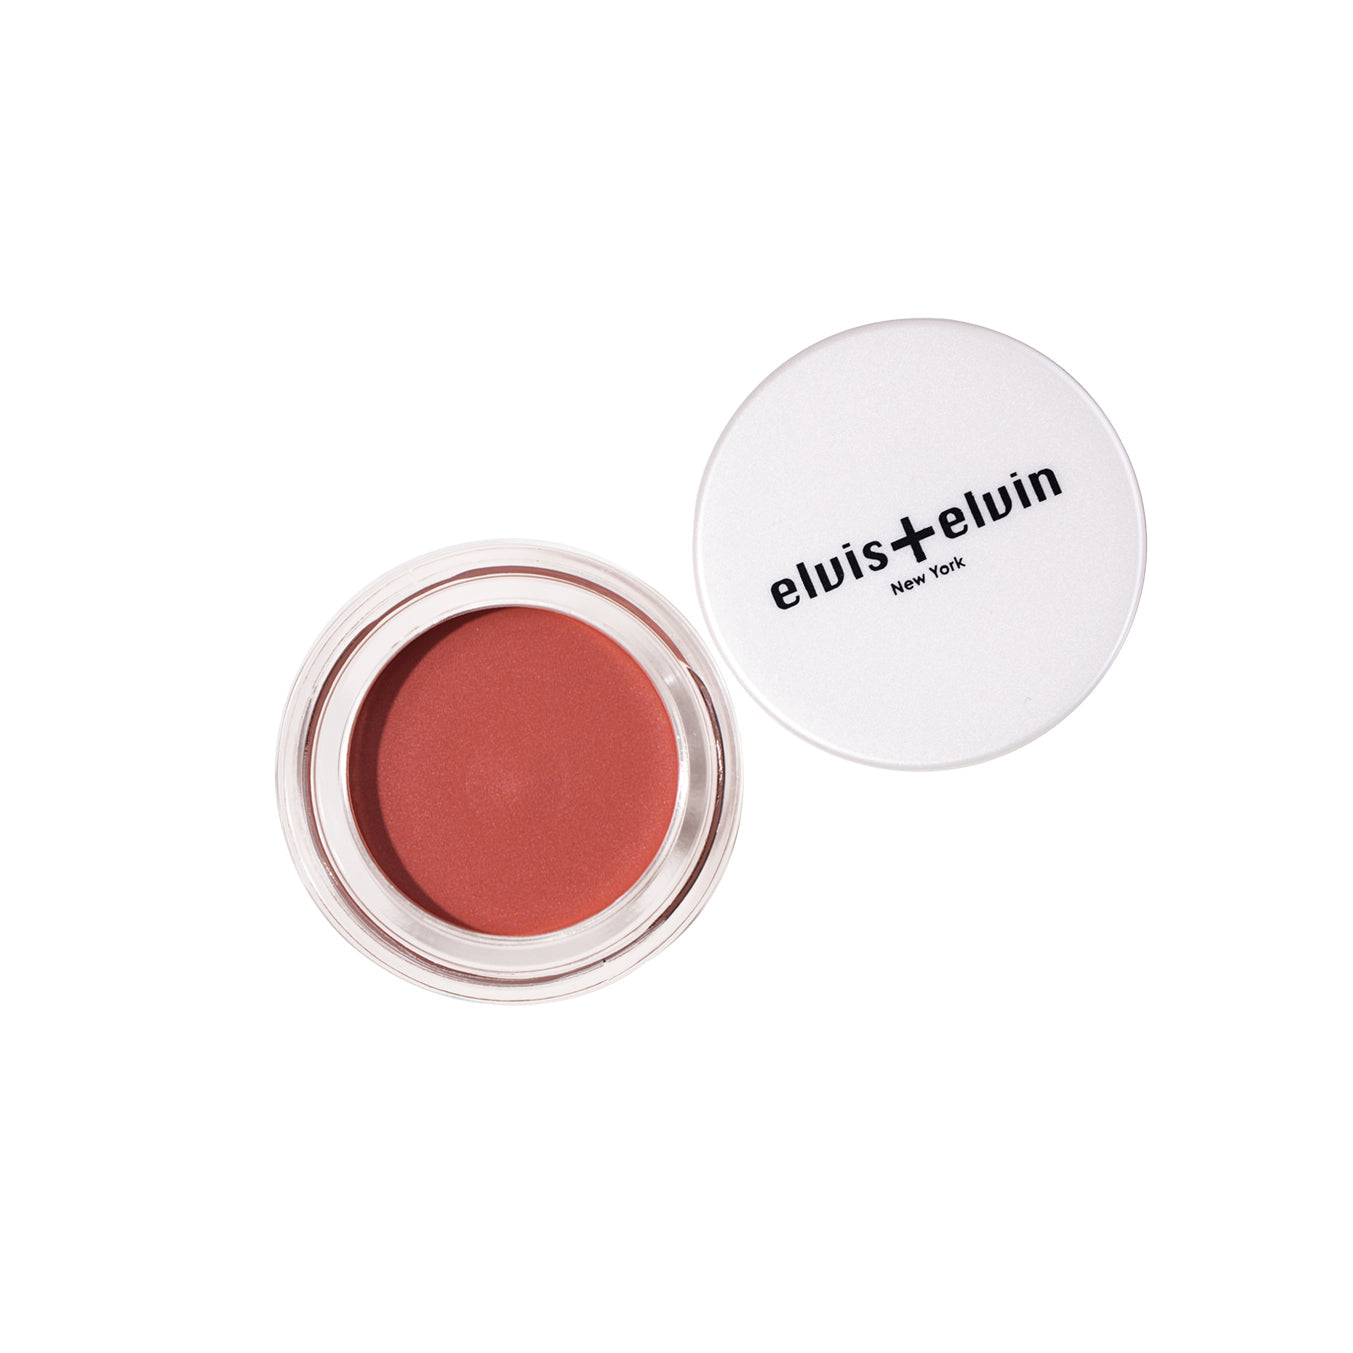 Floral Silky Cream Blush （2023 New color） by elvis+elvin